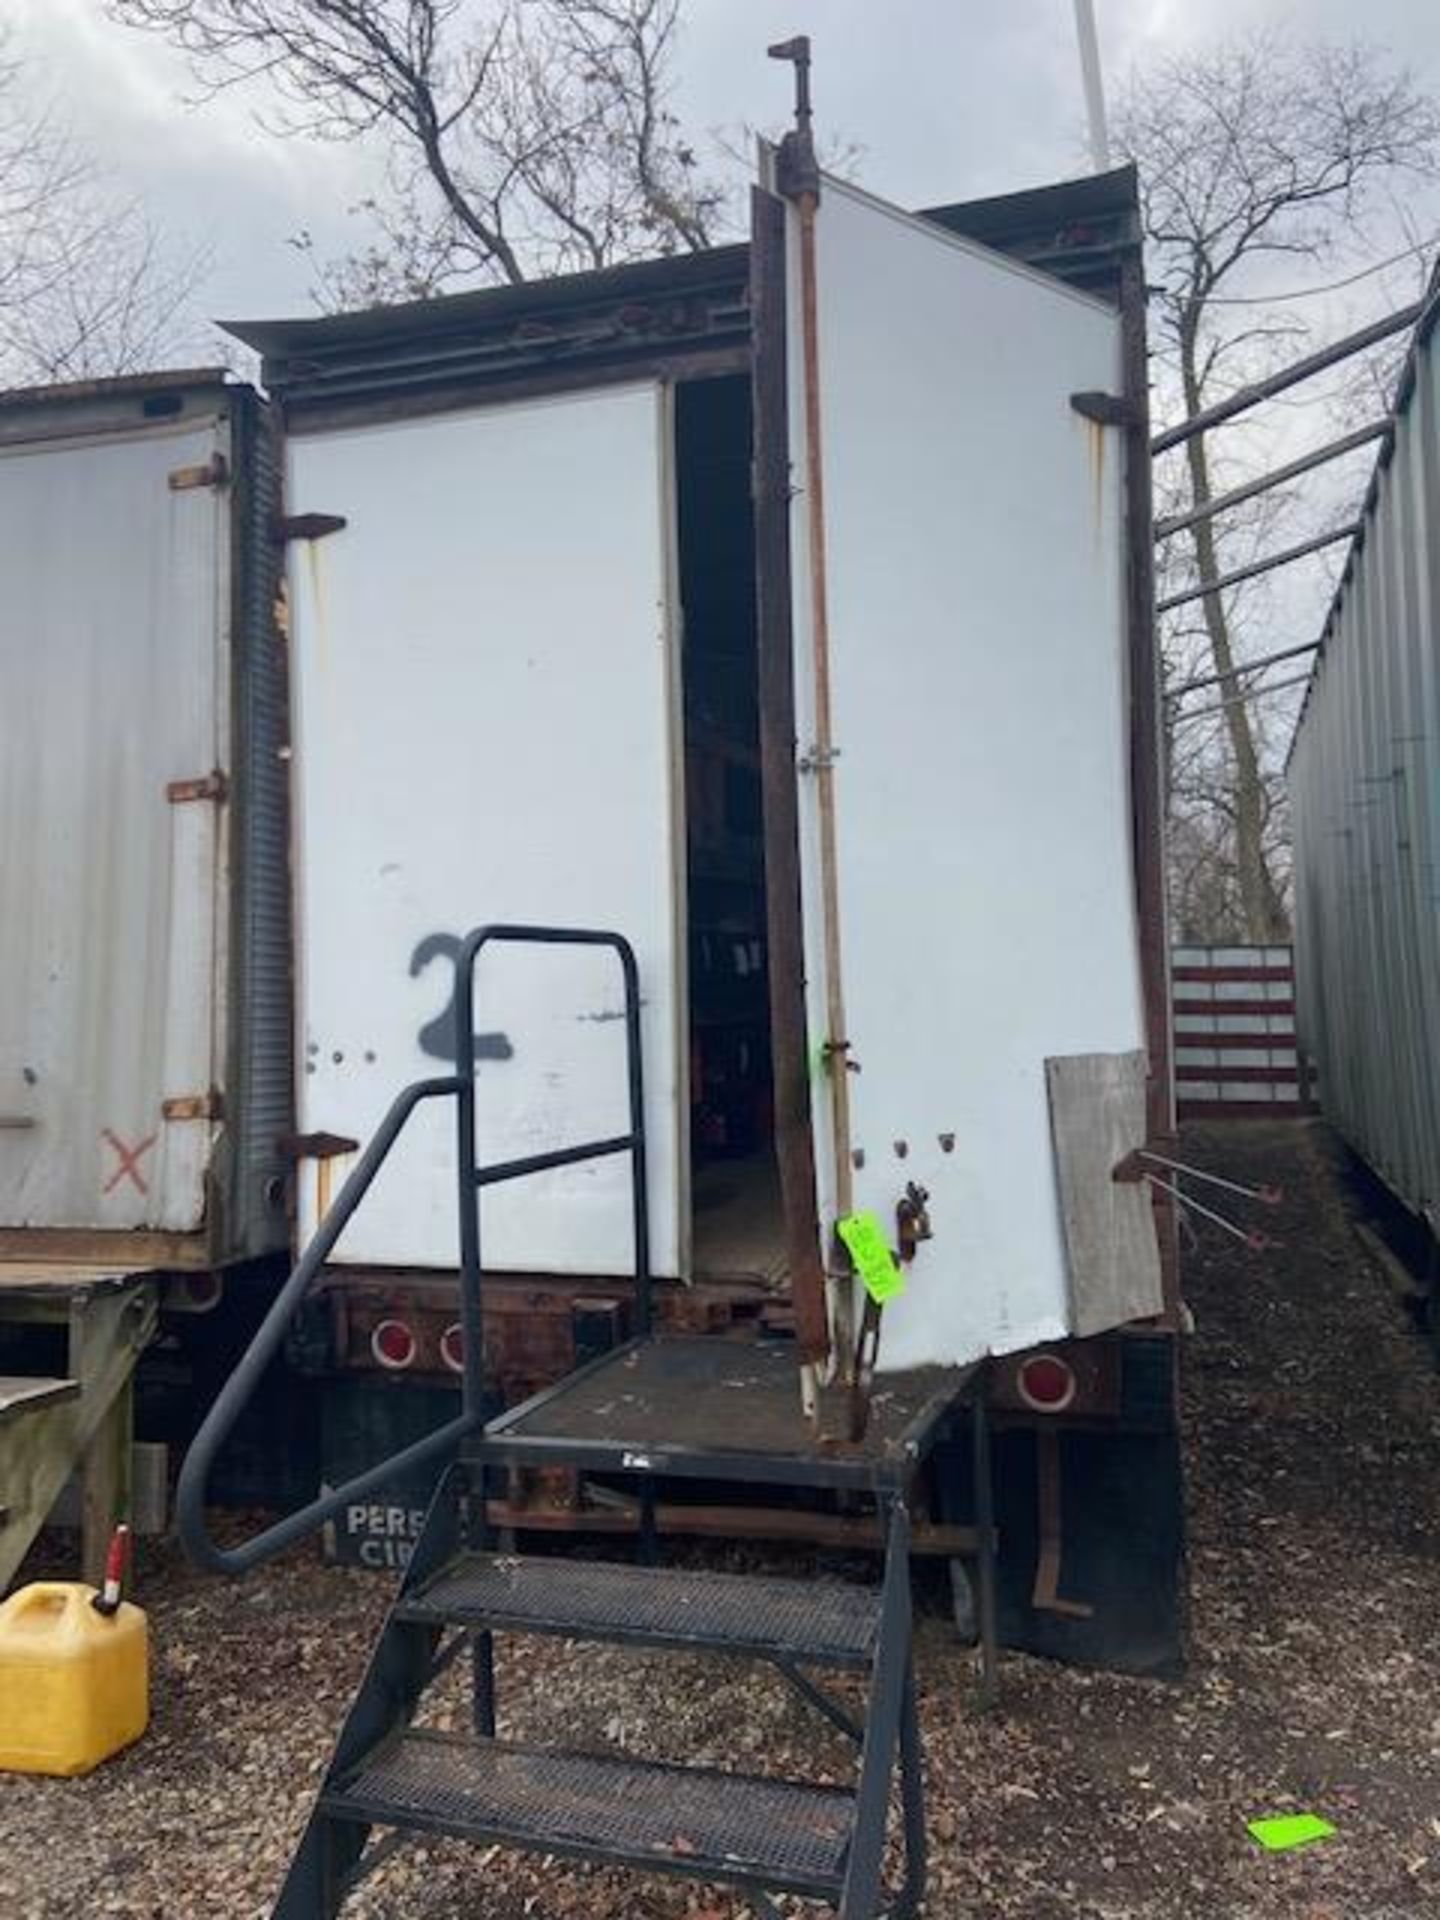 36 ft. Box Trailer (NOTE: Used for Storage) (TRAILER #2) (LOCATED IN MONROEVILLE, PA) - Image 8 of 8